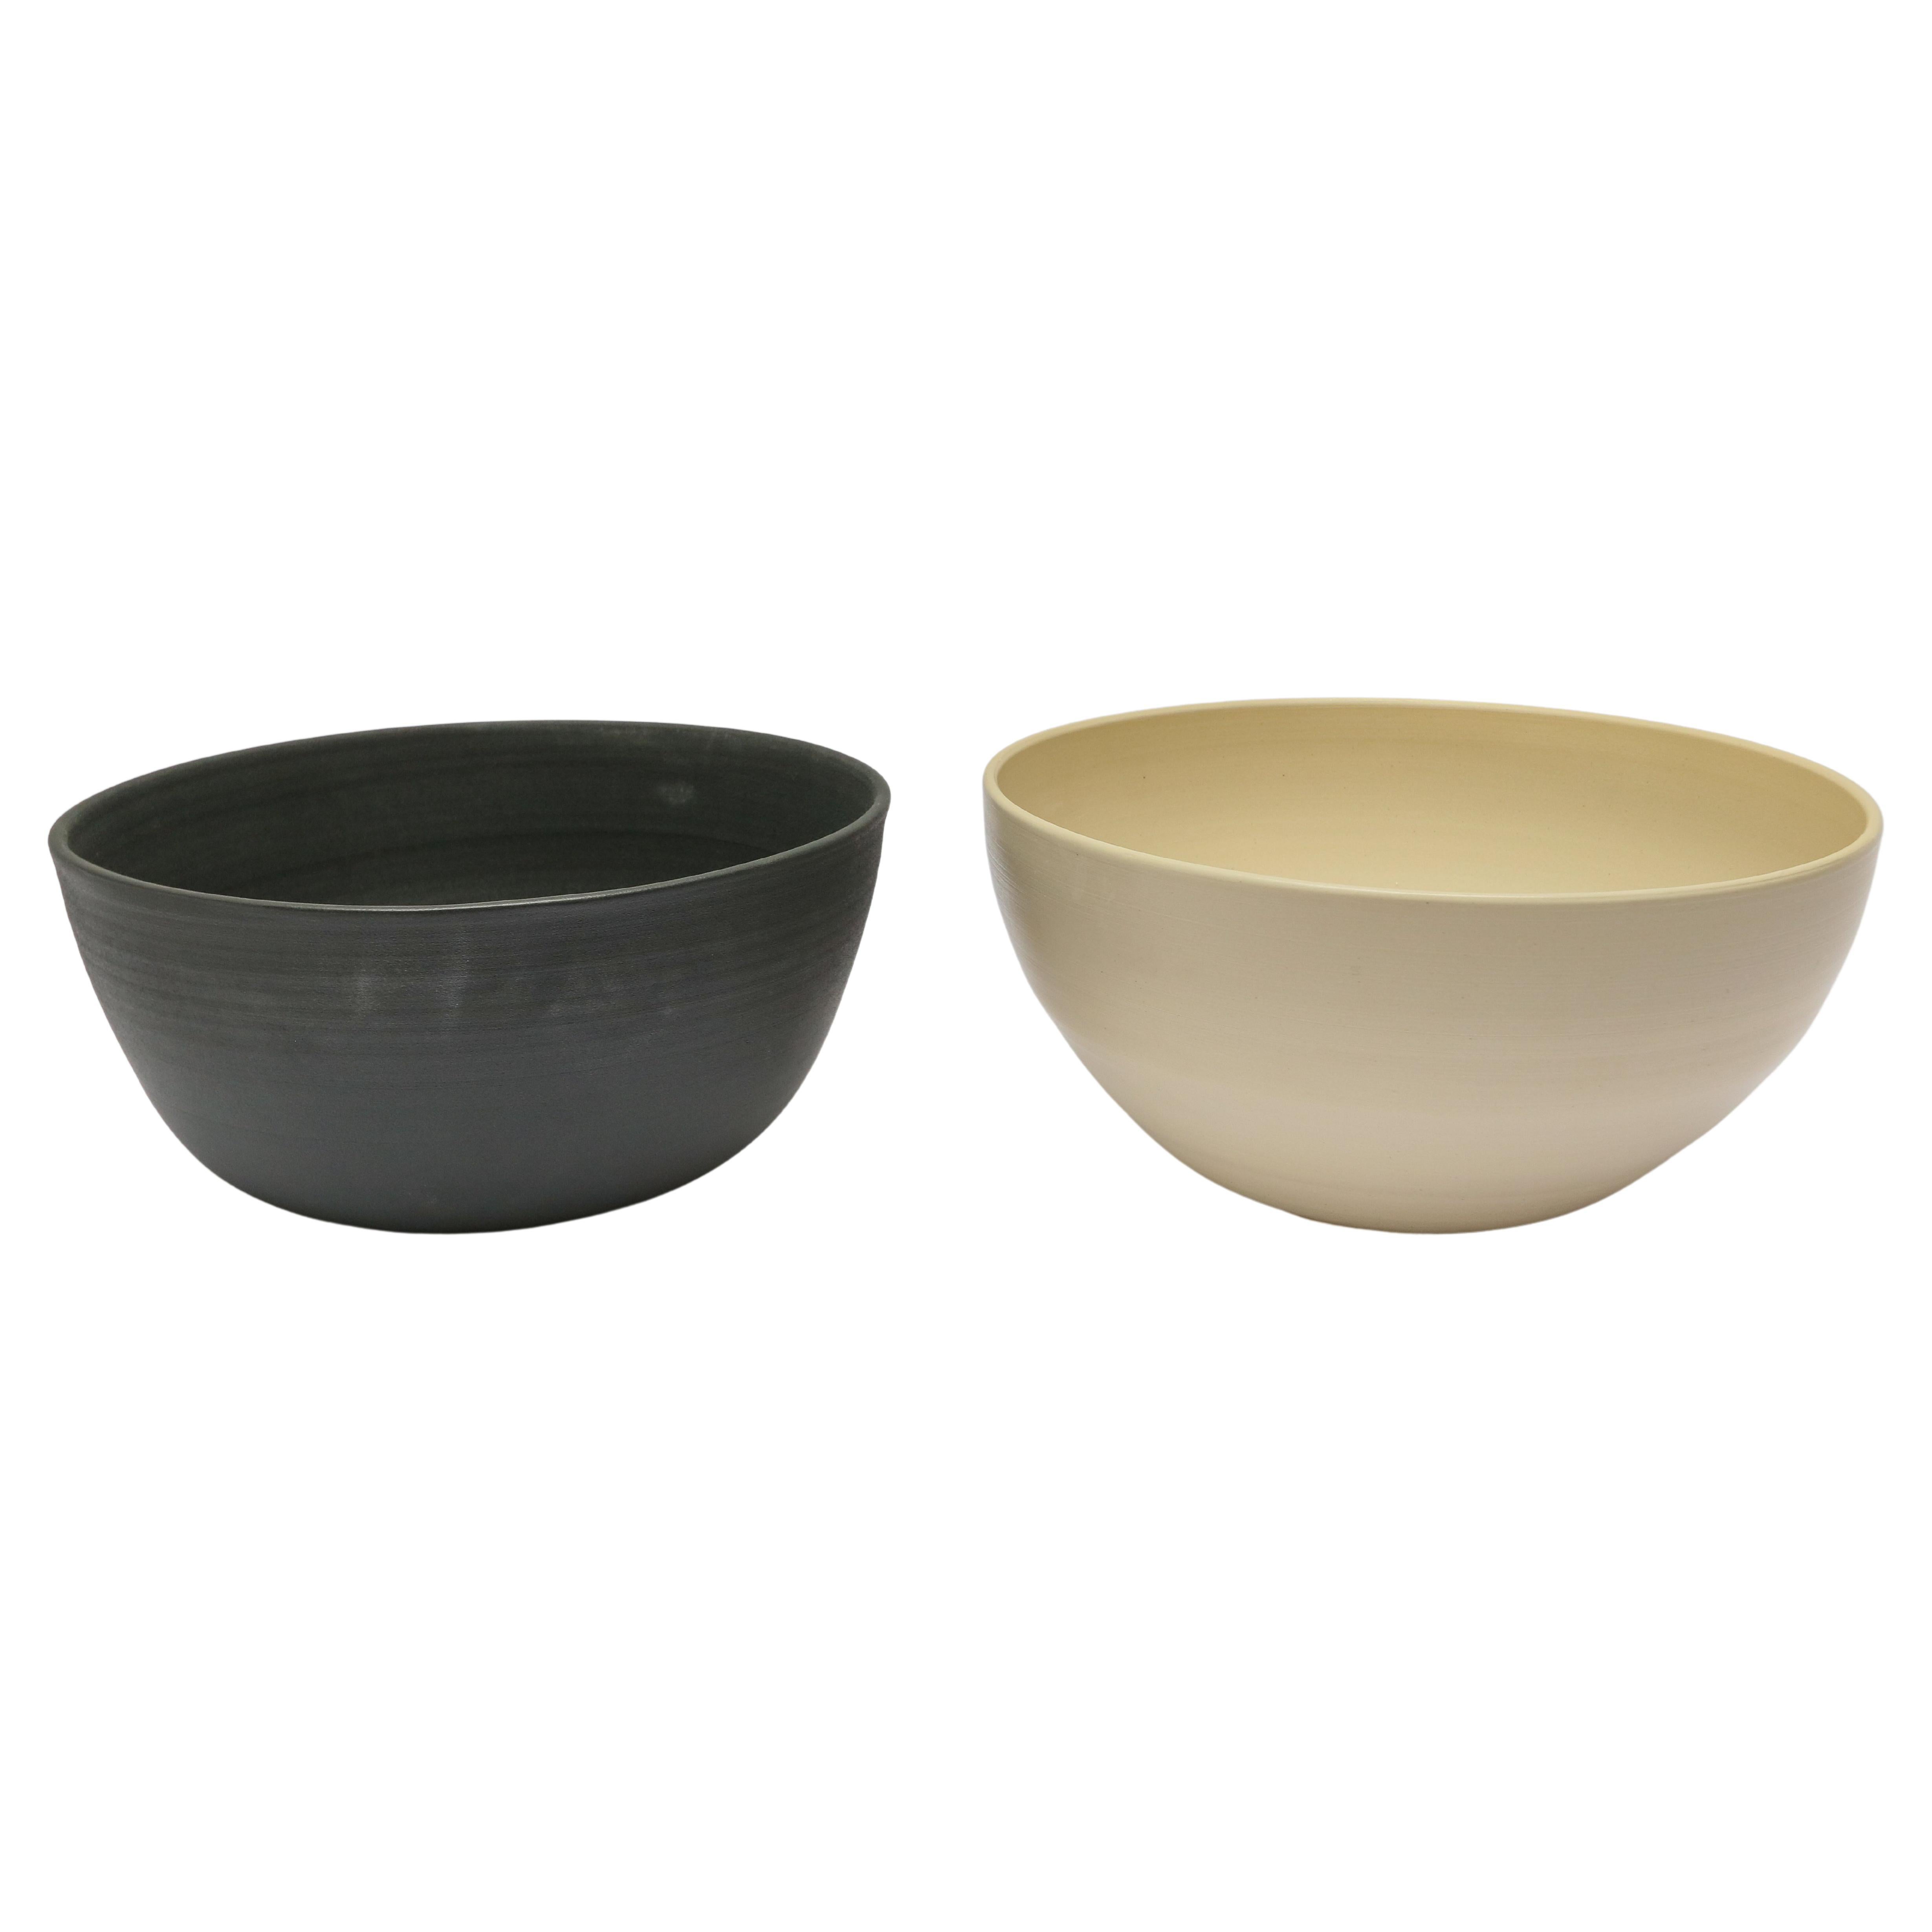 Forever Bowl in Blanc White and Noir Black by Style Union Home